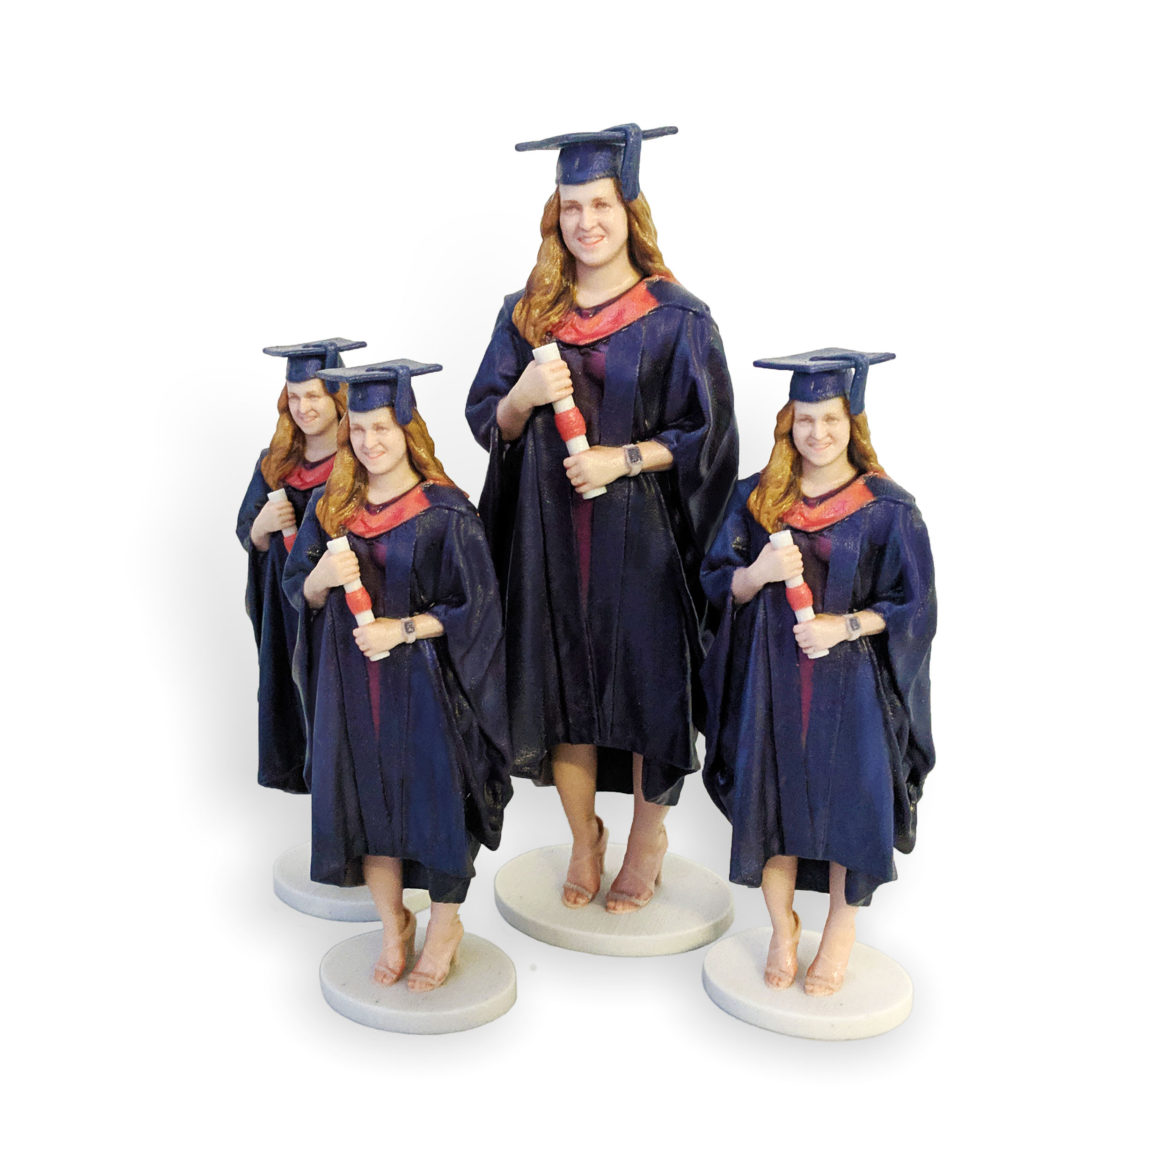 my3Dtwin, four 3D Printed Graduation Figurines in blue gown and scroll in hands